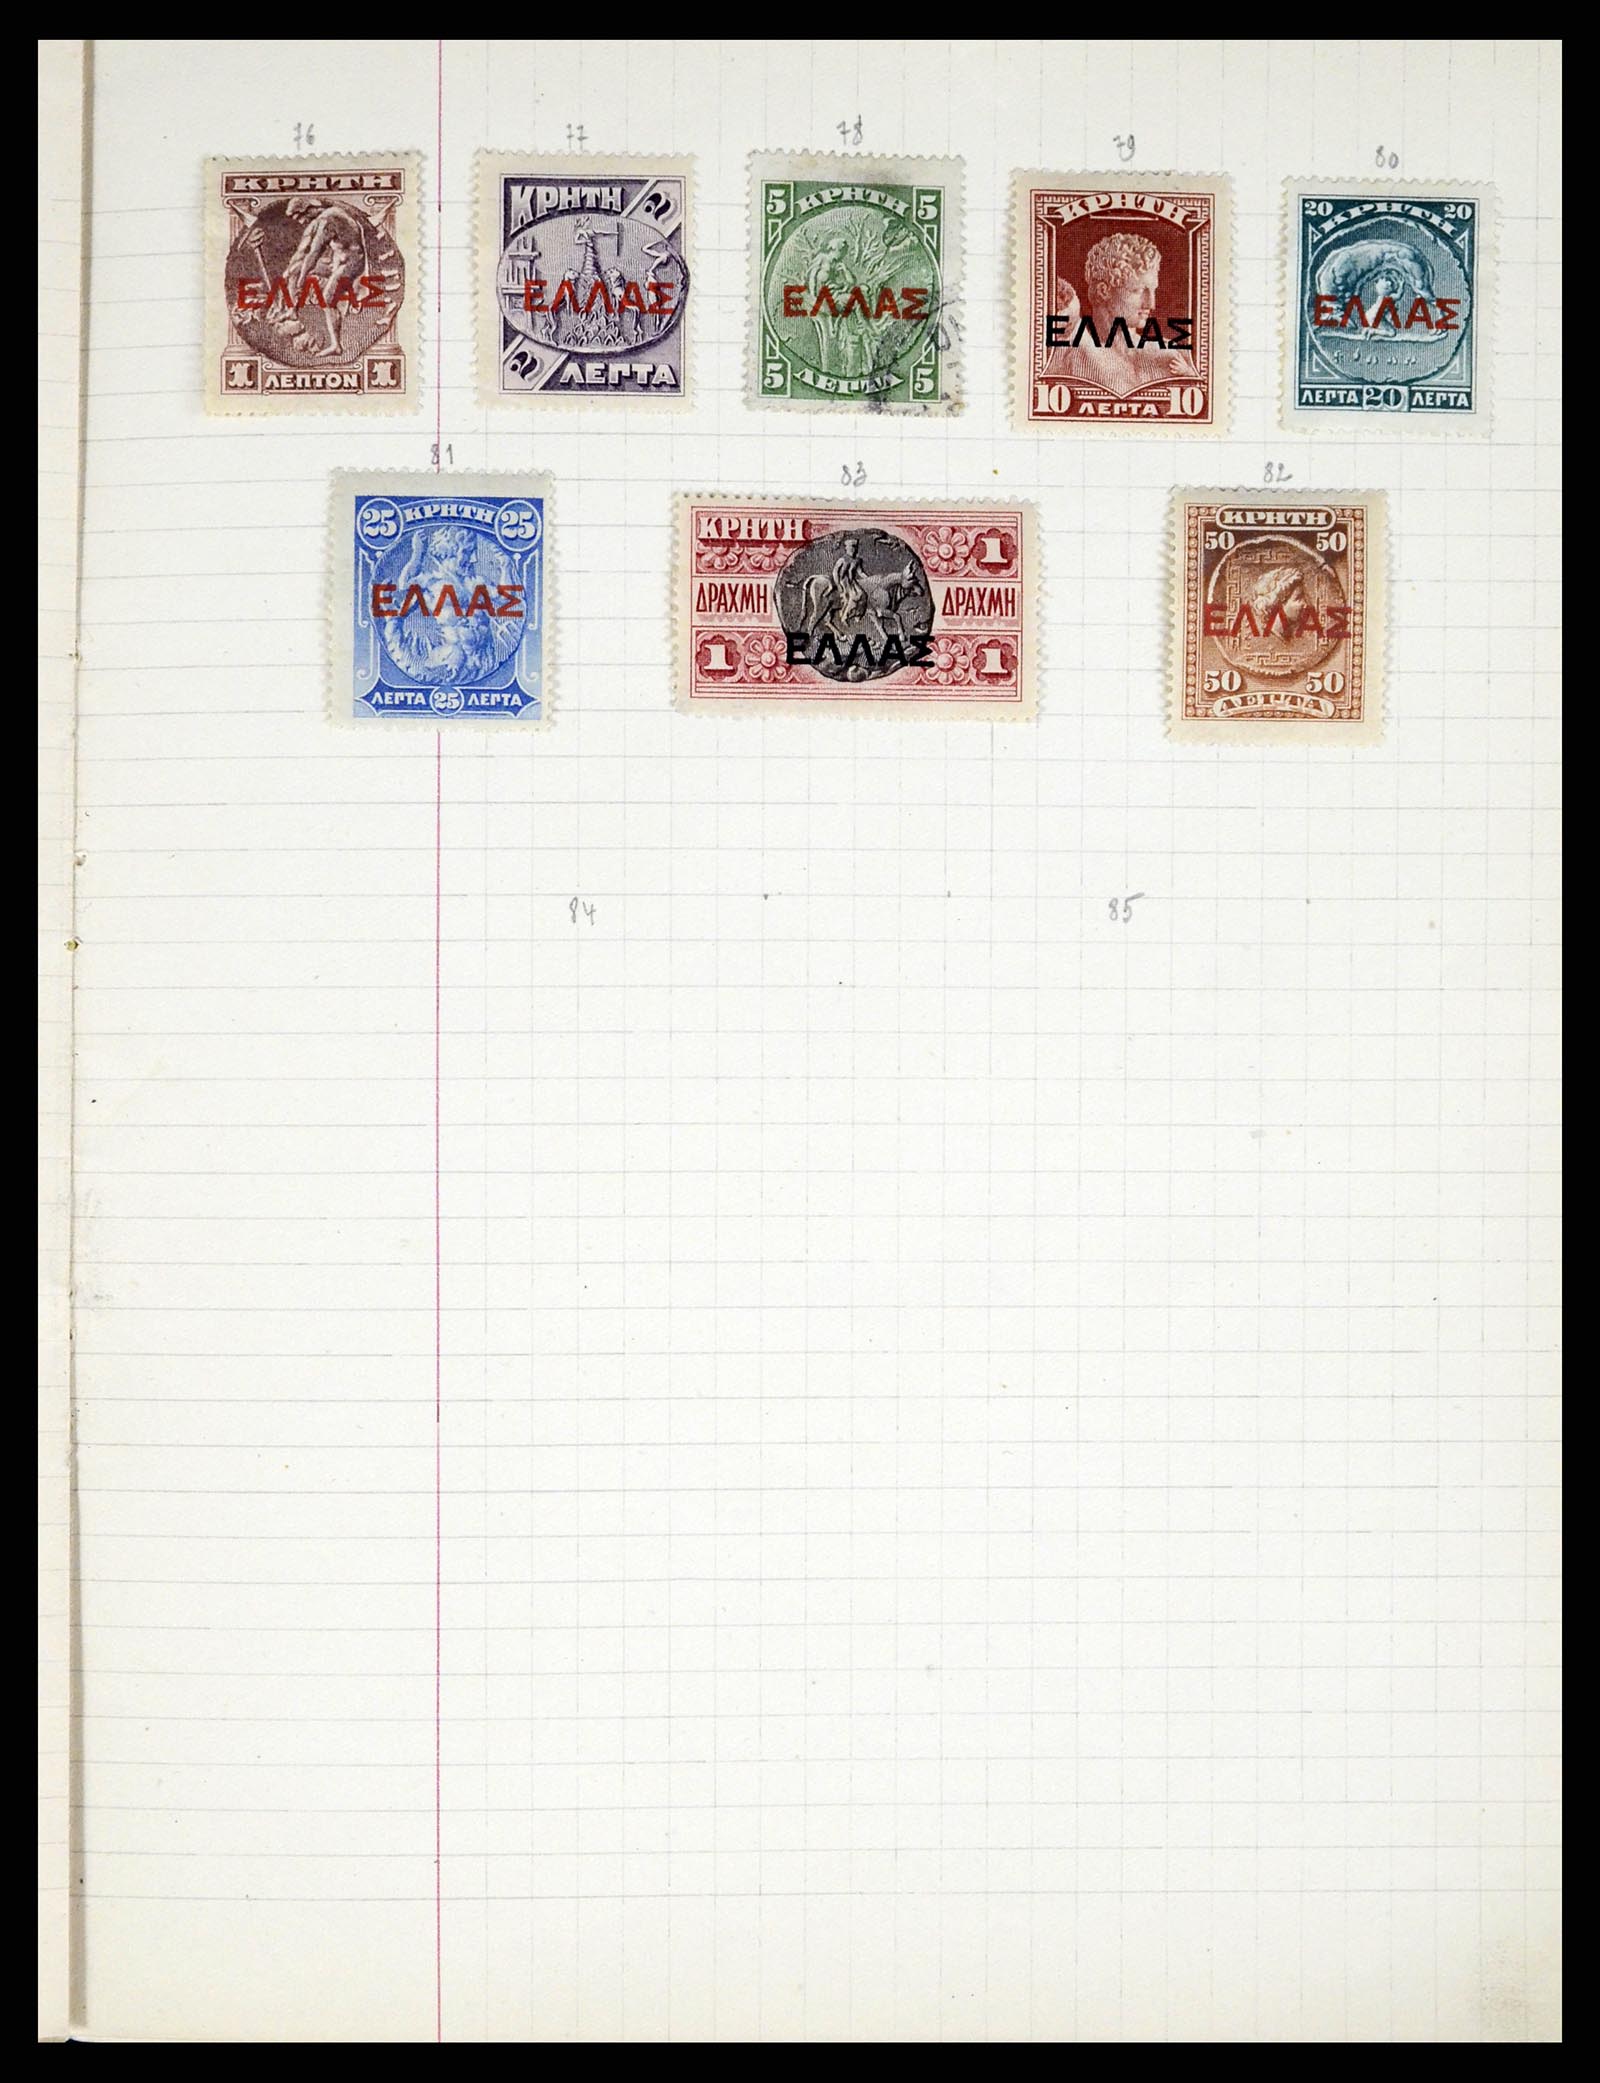 37280 079 - Stamp collection 37280 World classic 1840-1900.